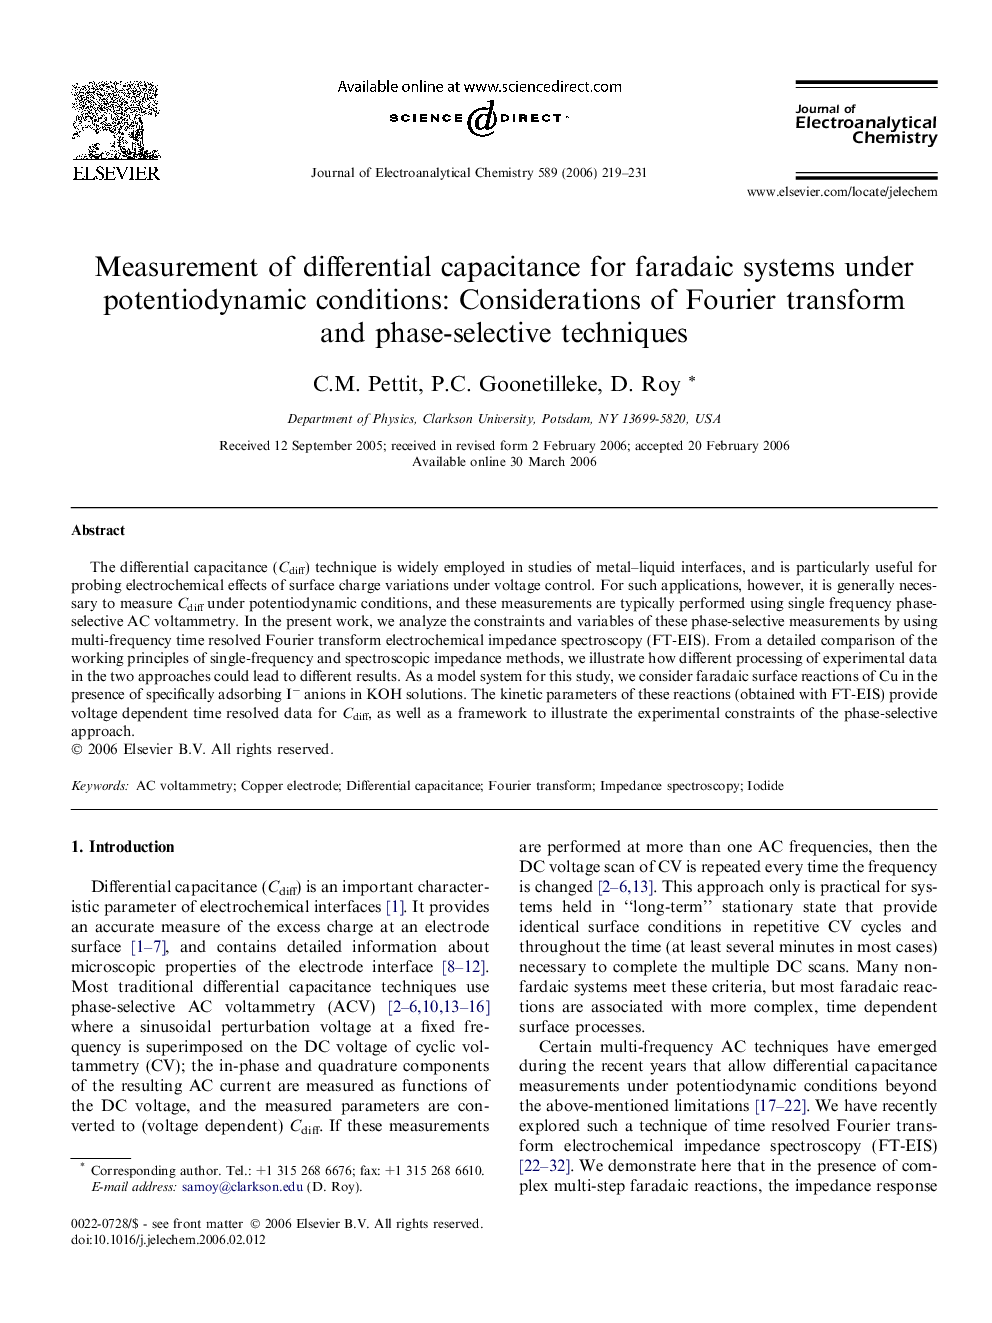 Measurement of differential capacitance for faradaic systems under potentiodynamic conditions: Considerations of Fourier transform and phase-selective techniques